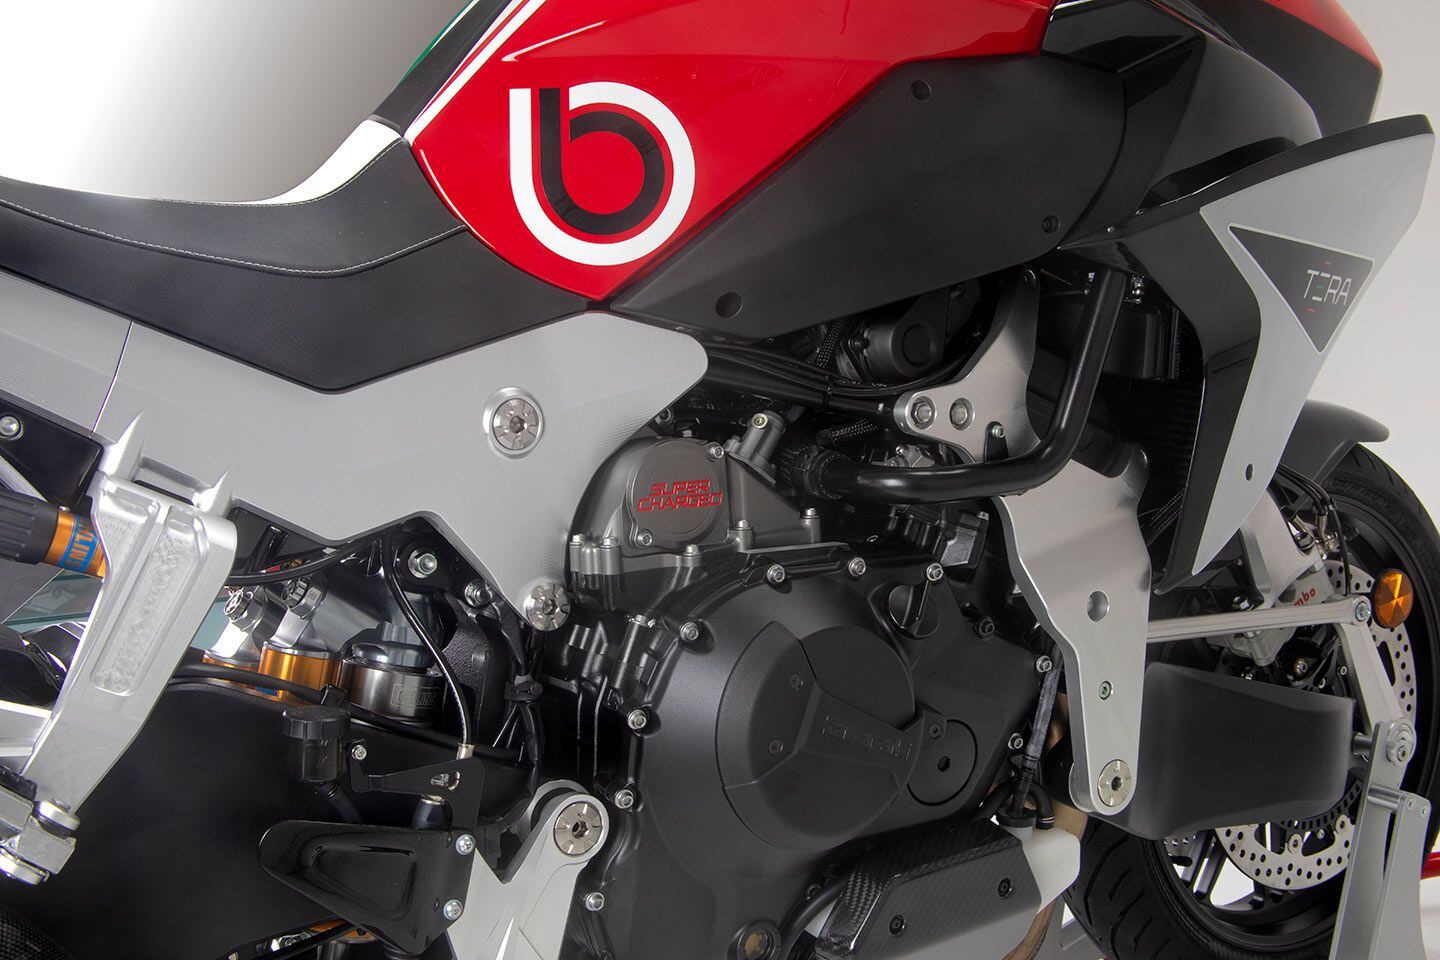 The front frame and rear frame both bolt the engine, which is used as a stressed member and forms the center of the bike’s chassis.